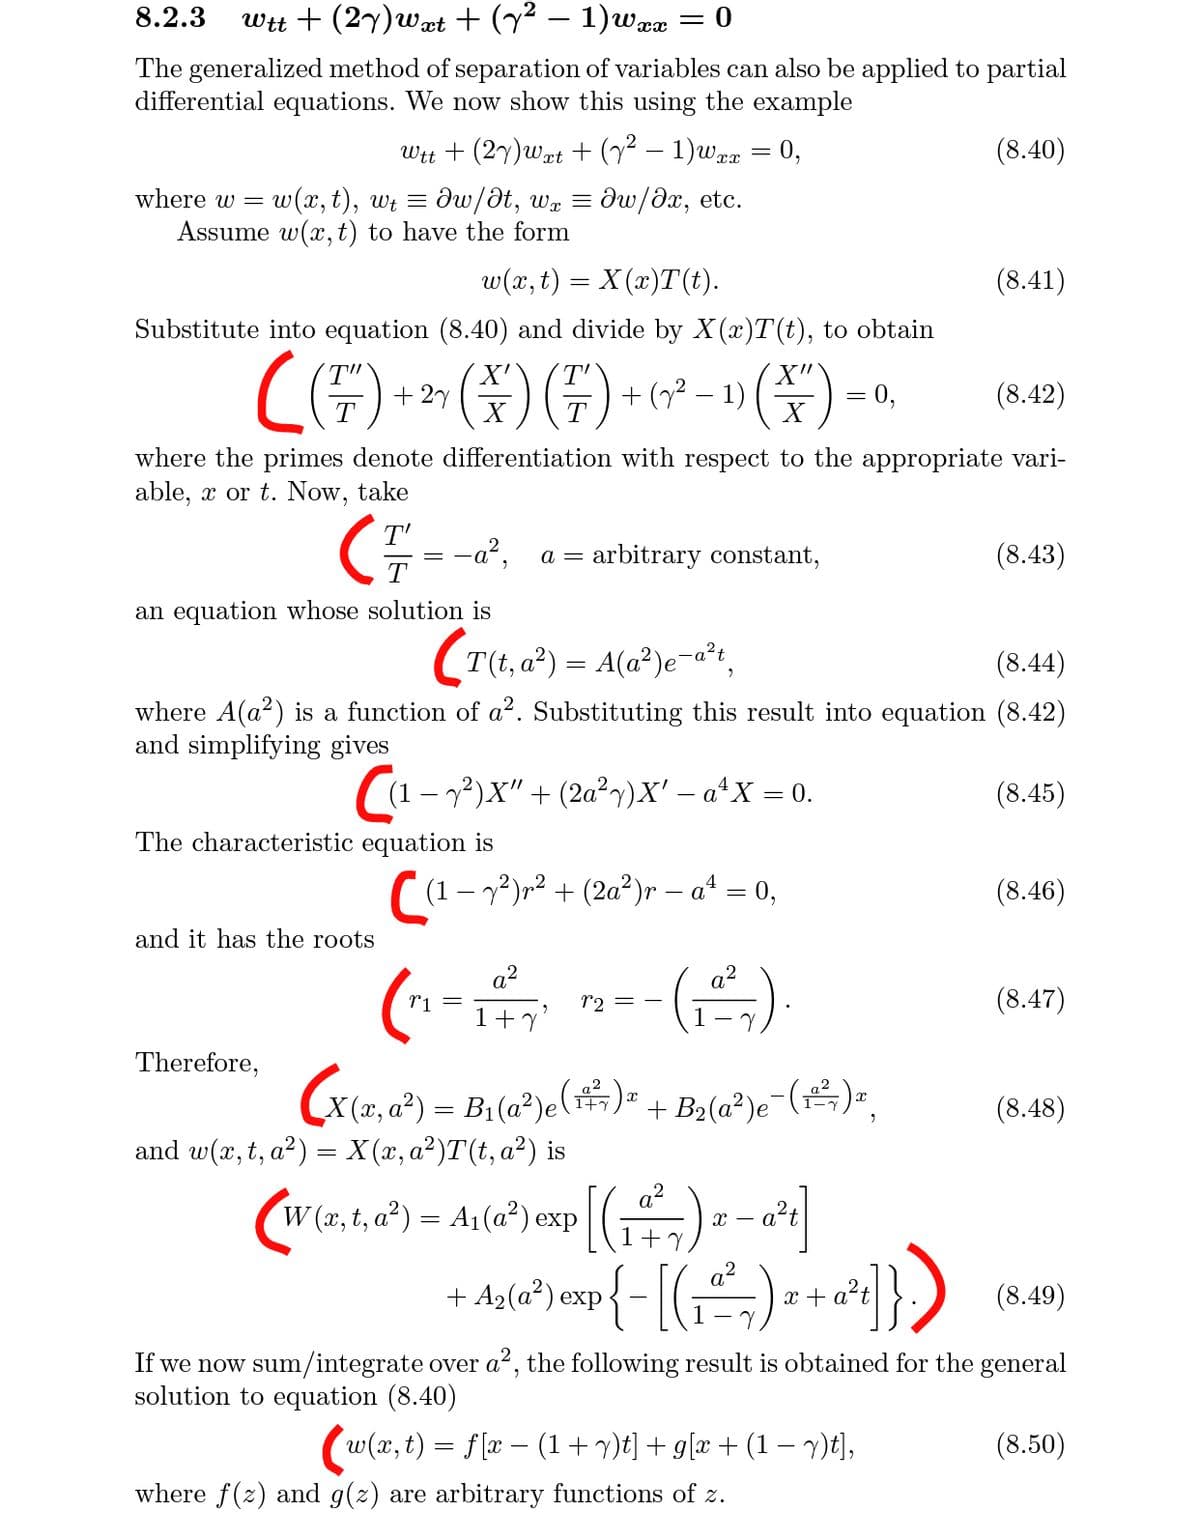 8.2.3
Wit + (27)Wat + (y² – 1)wæx
The generalized method of separation of variables can also be applied to partial
differential equations. We now show this using the example
Wtt + (27)wxt +(y² – 1)wrx = 0,
(8.40)
where w =
w(x, t), wt = ôw/Ət, wx = dw/dx, etc.
Assume w(x, t) to have the form
w(x, t) = X(x)T(t).
(8.41)
Substitute into equation (8.40) and divide by X(x)T(t), to obtain
X'
+ 2y
X
+ (y² – 1)
- 0,
(8.42)
X
where the primes denote differentiation with respect to the appropriate vari-
able, x or t. Now, take
T'
E= -a?, a = arbitrary constant,
(8.43)
an equation whose solution is
(T(t, a?) = A(a²)e¬«'t,
(8.44)
where A(a2) is a function of a². Substituting this result into equation (8.42)
and simplifying gives
-22)X" + (2a²)X' – a*X = 0.
(8.45)
The characteristic equation is
((1- 72)r2 + (2a²)r – a* = 0,
(8.46)
and it has the roots
a?
a2
r1
(8.47)
T2 = -
1+y'
Therefore,
(x(2, a²) = B1(a®)e(#)-
+ B2(a²)e¬()=.
1+y
X (x,
(8.48)
and w(x, t, a²) = X (x, a²)T(t, a²) is
W (x, t, a²) = A1(a²) exp
+ Azla*) exp{- [(1,)
x + a²t
(8.49)
If we now sum/integrate over a², the following result is obtained for the general
solution to equation (8.40)
w(x, t) = f[x – (1+y)t] + g[x + (1 – )t],
(8.50)
where f(z) and g(z) are arbitrary functions of z.
